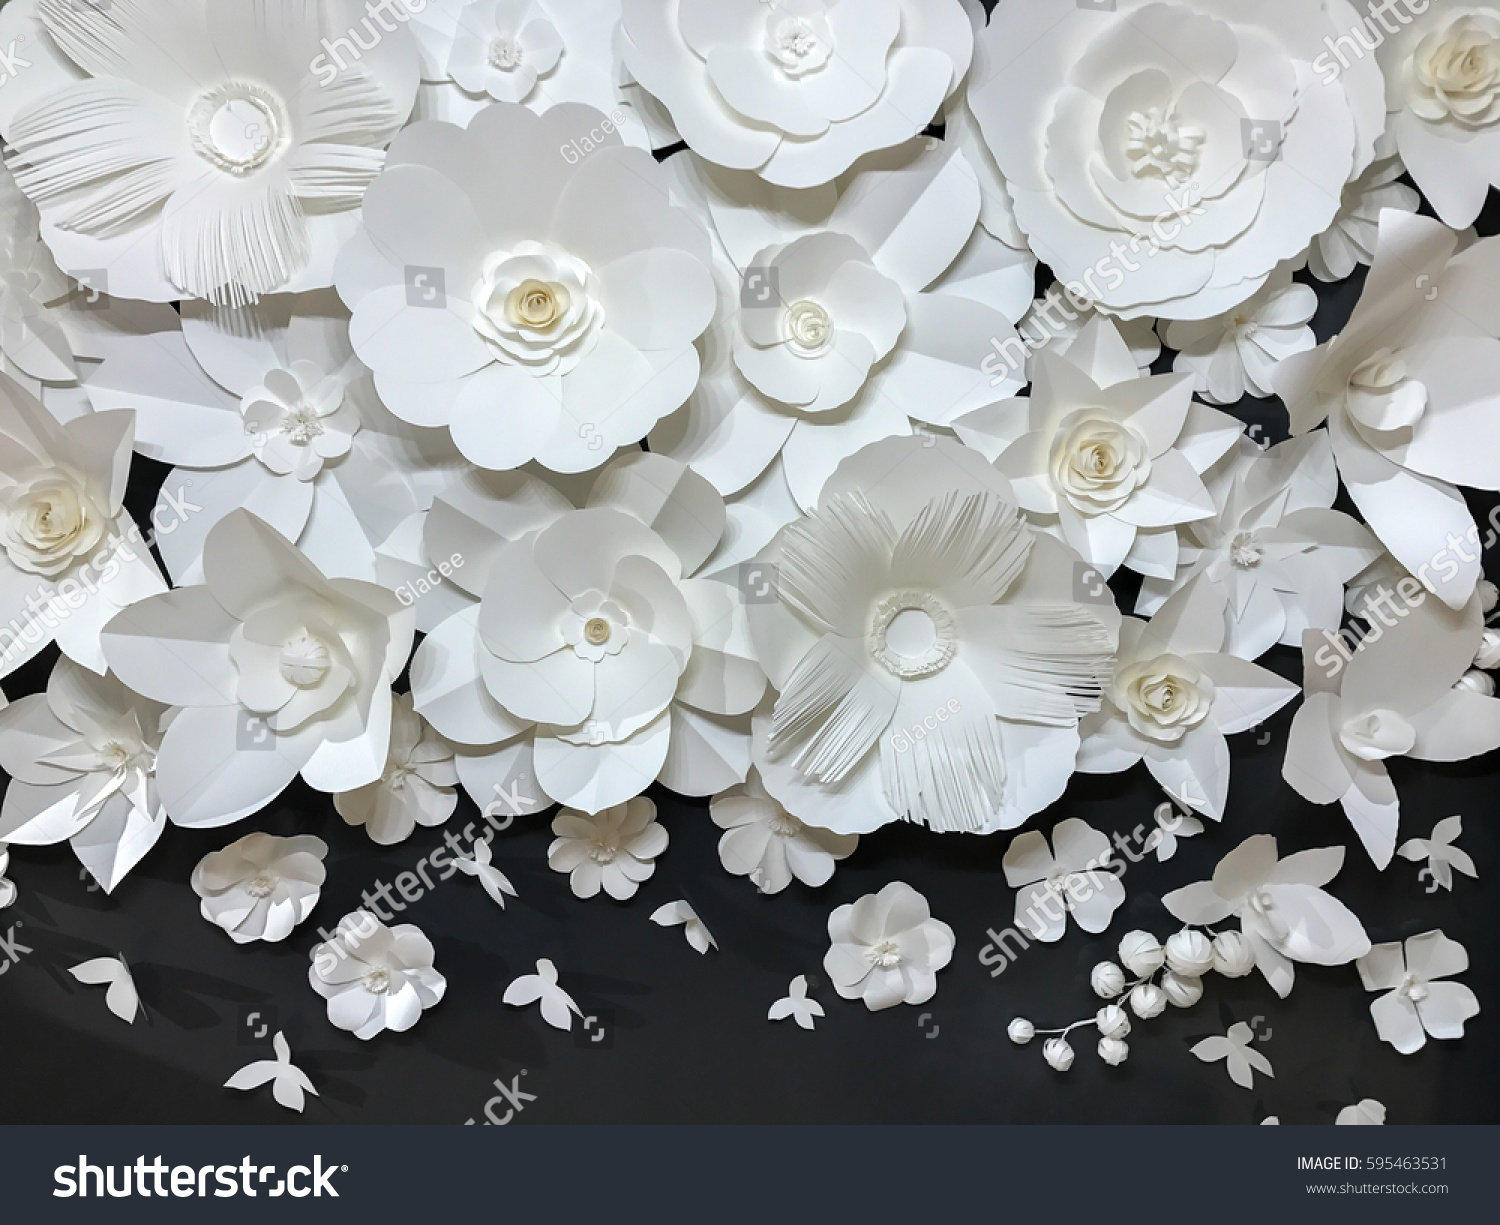 Beautiful Group of Variety Style Handmade Quilling White Floral Pattern with Small Butterfly made from Paper on Black Fabric Wall Background used as Template of Flowers Interior Vintage Retro Style #595463531